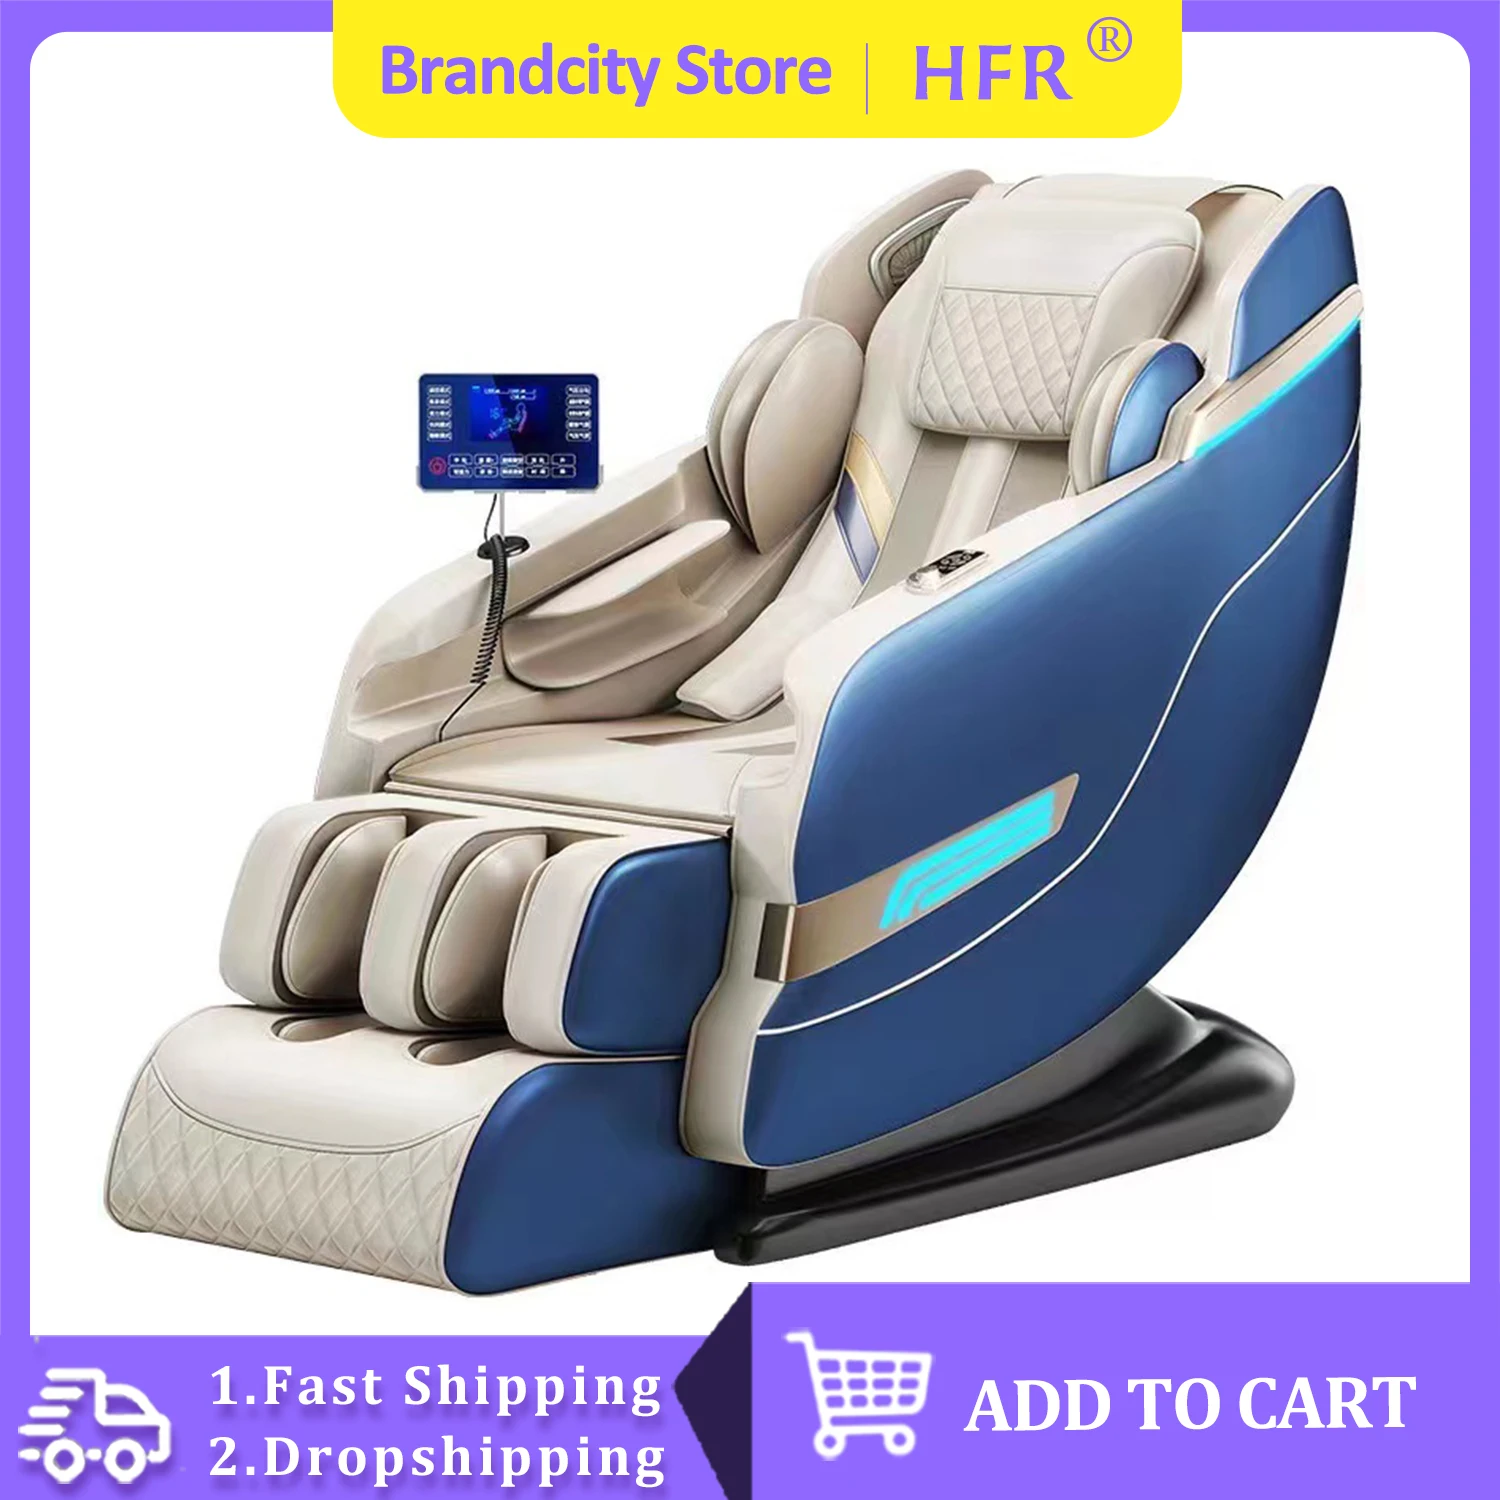 HFR-L3 Luxury massage chair home commercial multifunctional intelligent fully automatic shared capsule sofa massage chair household full body multifunctional automatic space capsule sl guide rail electric sofa for the elderly